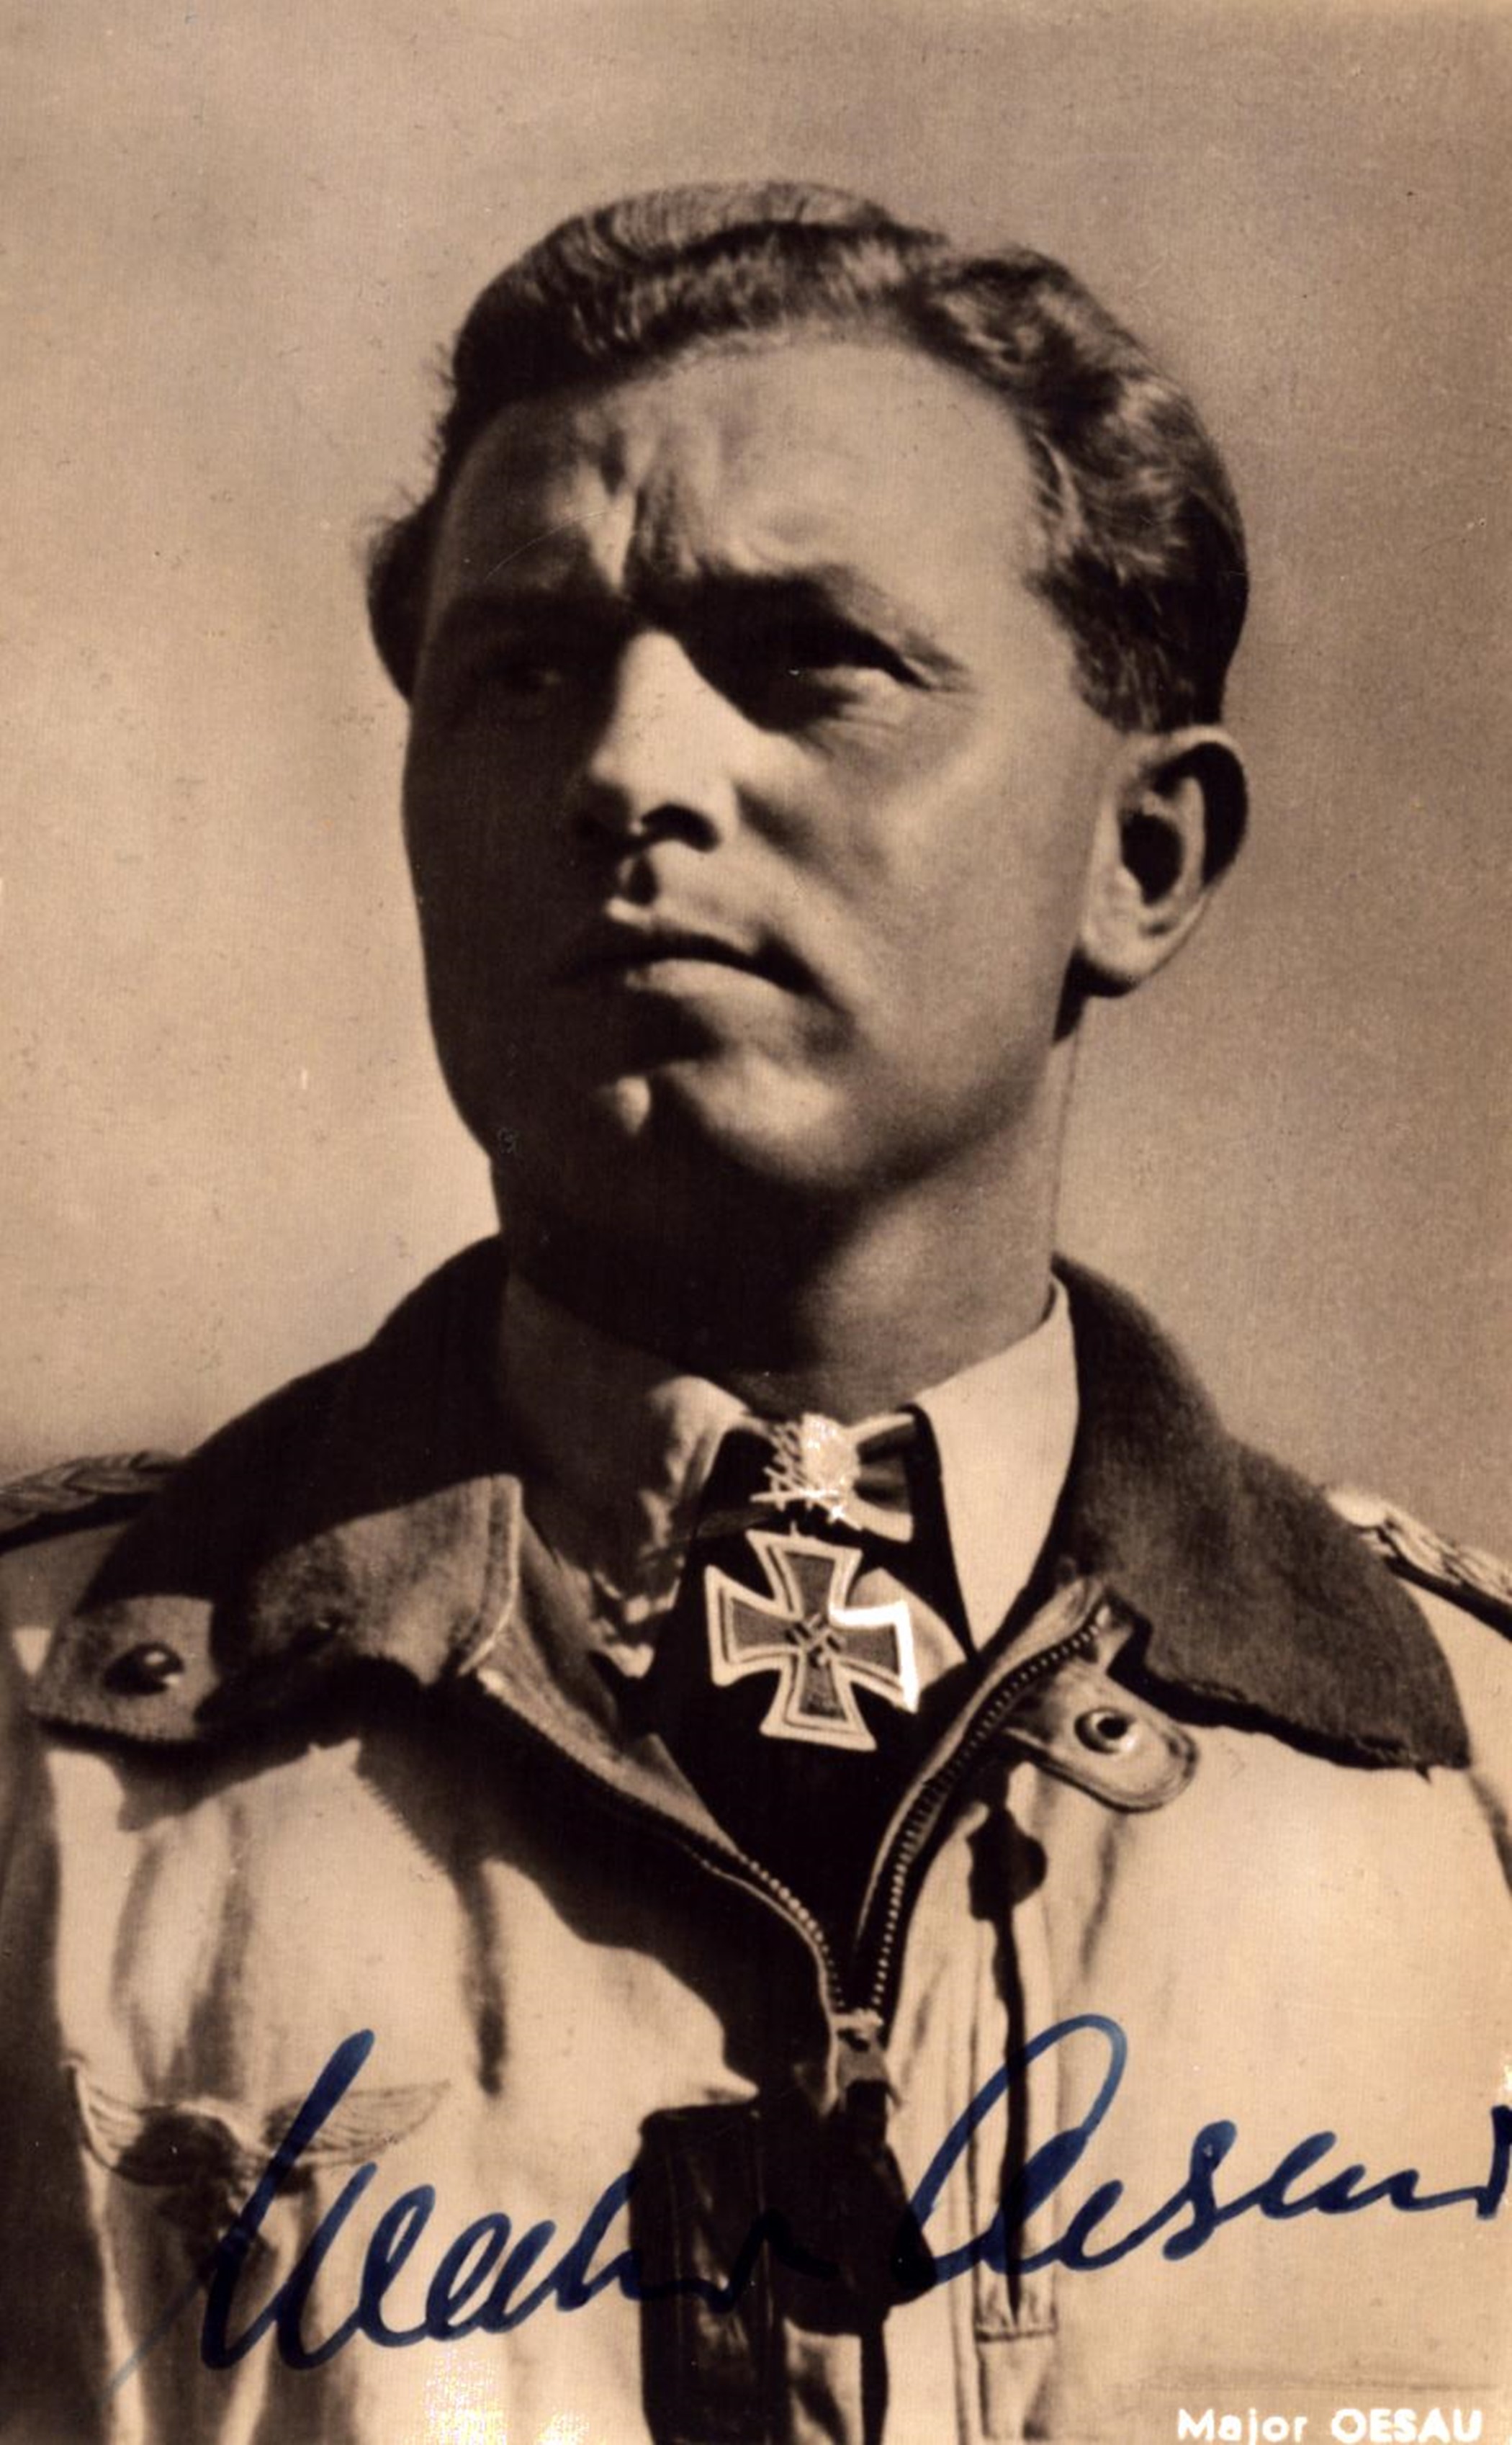 Luftwaffe Ace Walter Oesau signed wartime original5x3 inch approx sepia photo. Walter "Gulle"